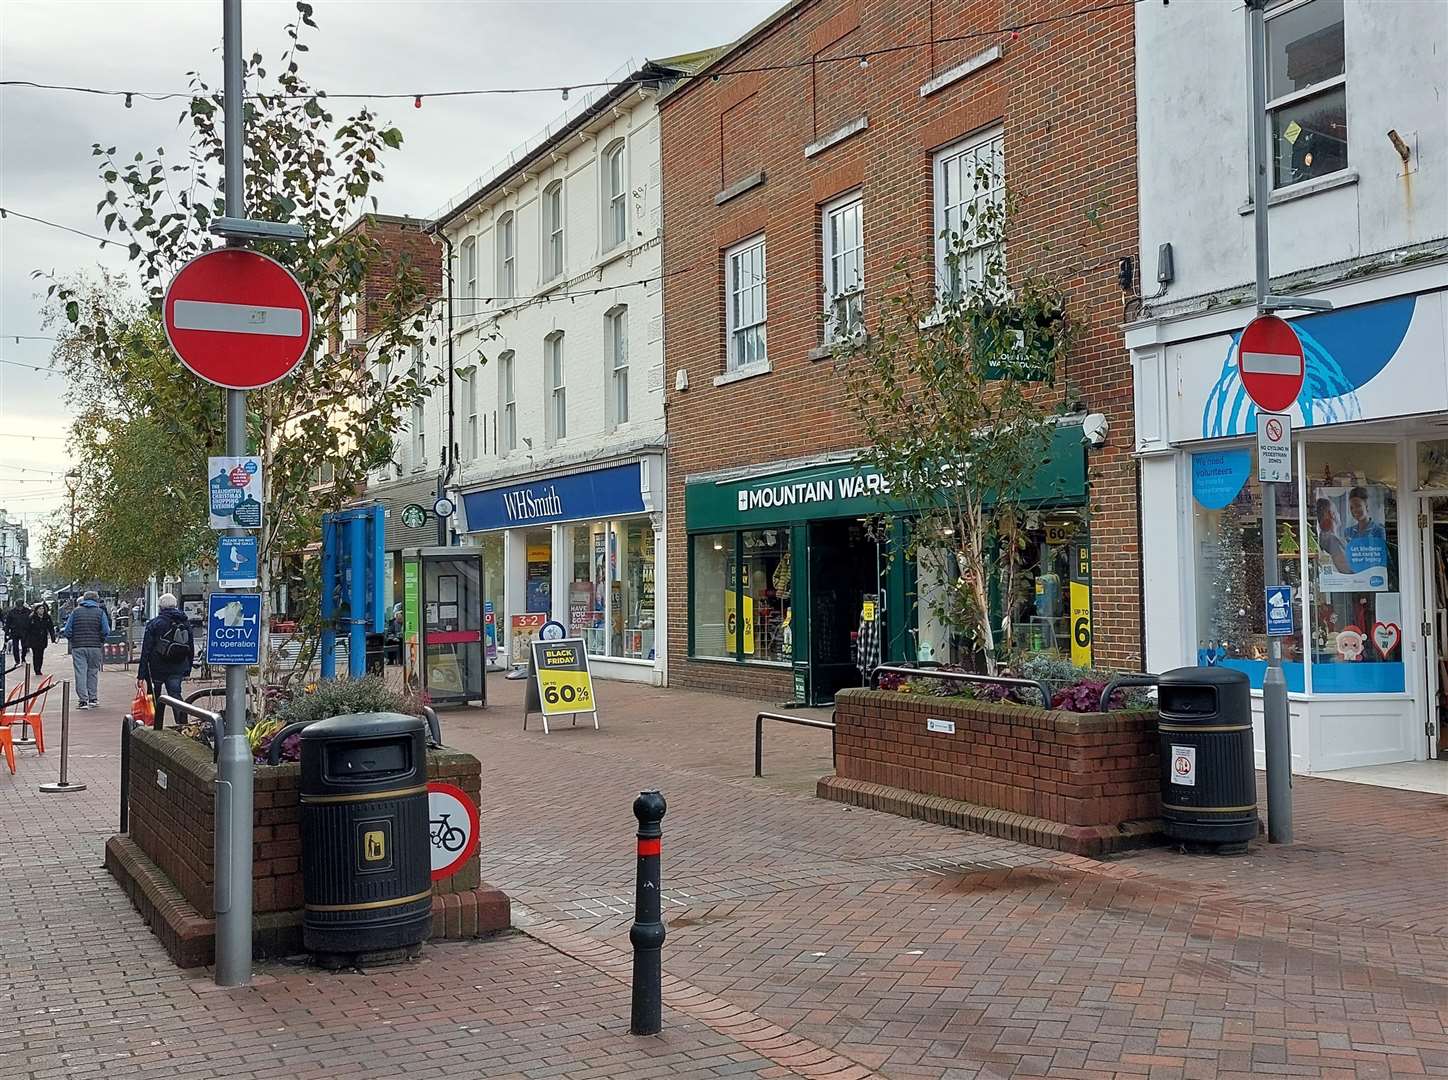 Part of Deal High Street is already permanently pedestrianised from the Sue Ryder charity shop to Lloyds Bank